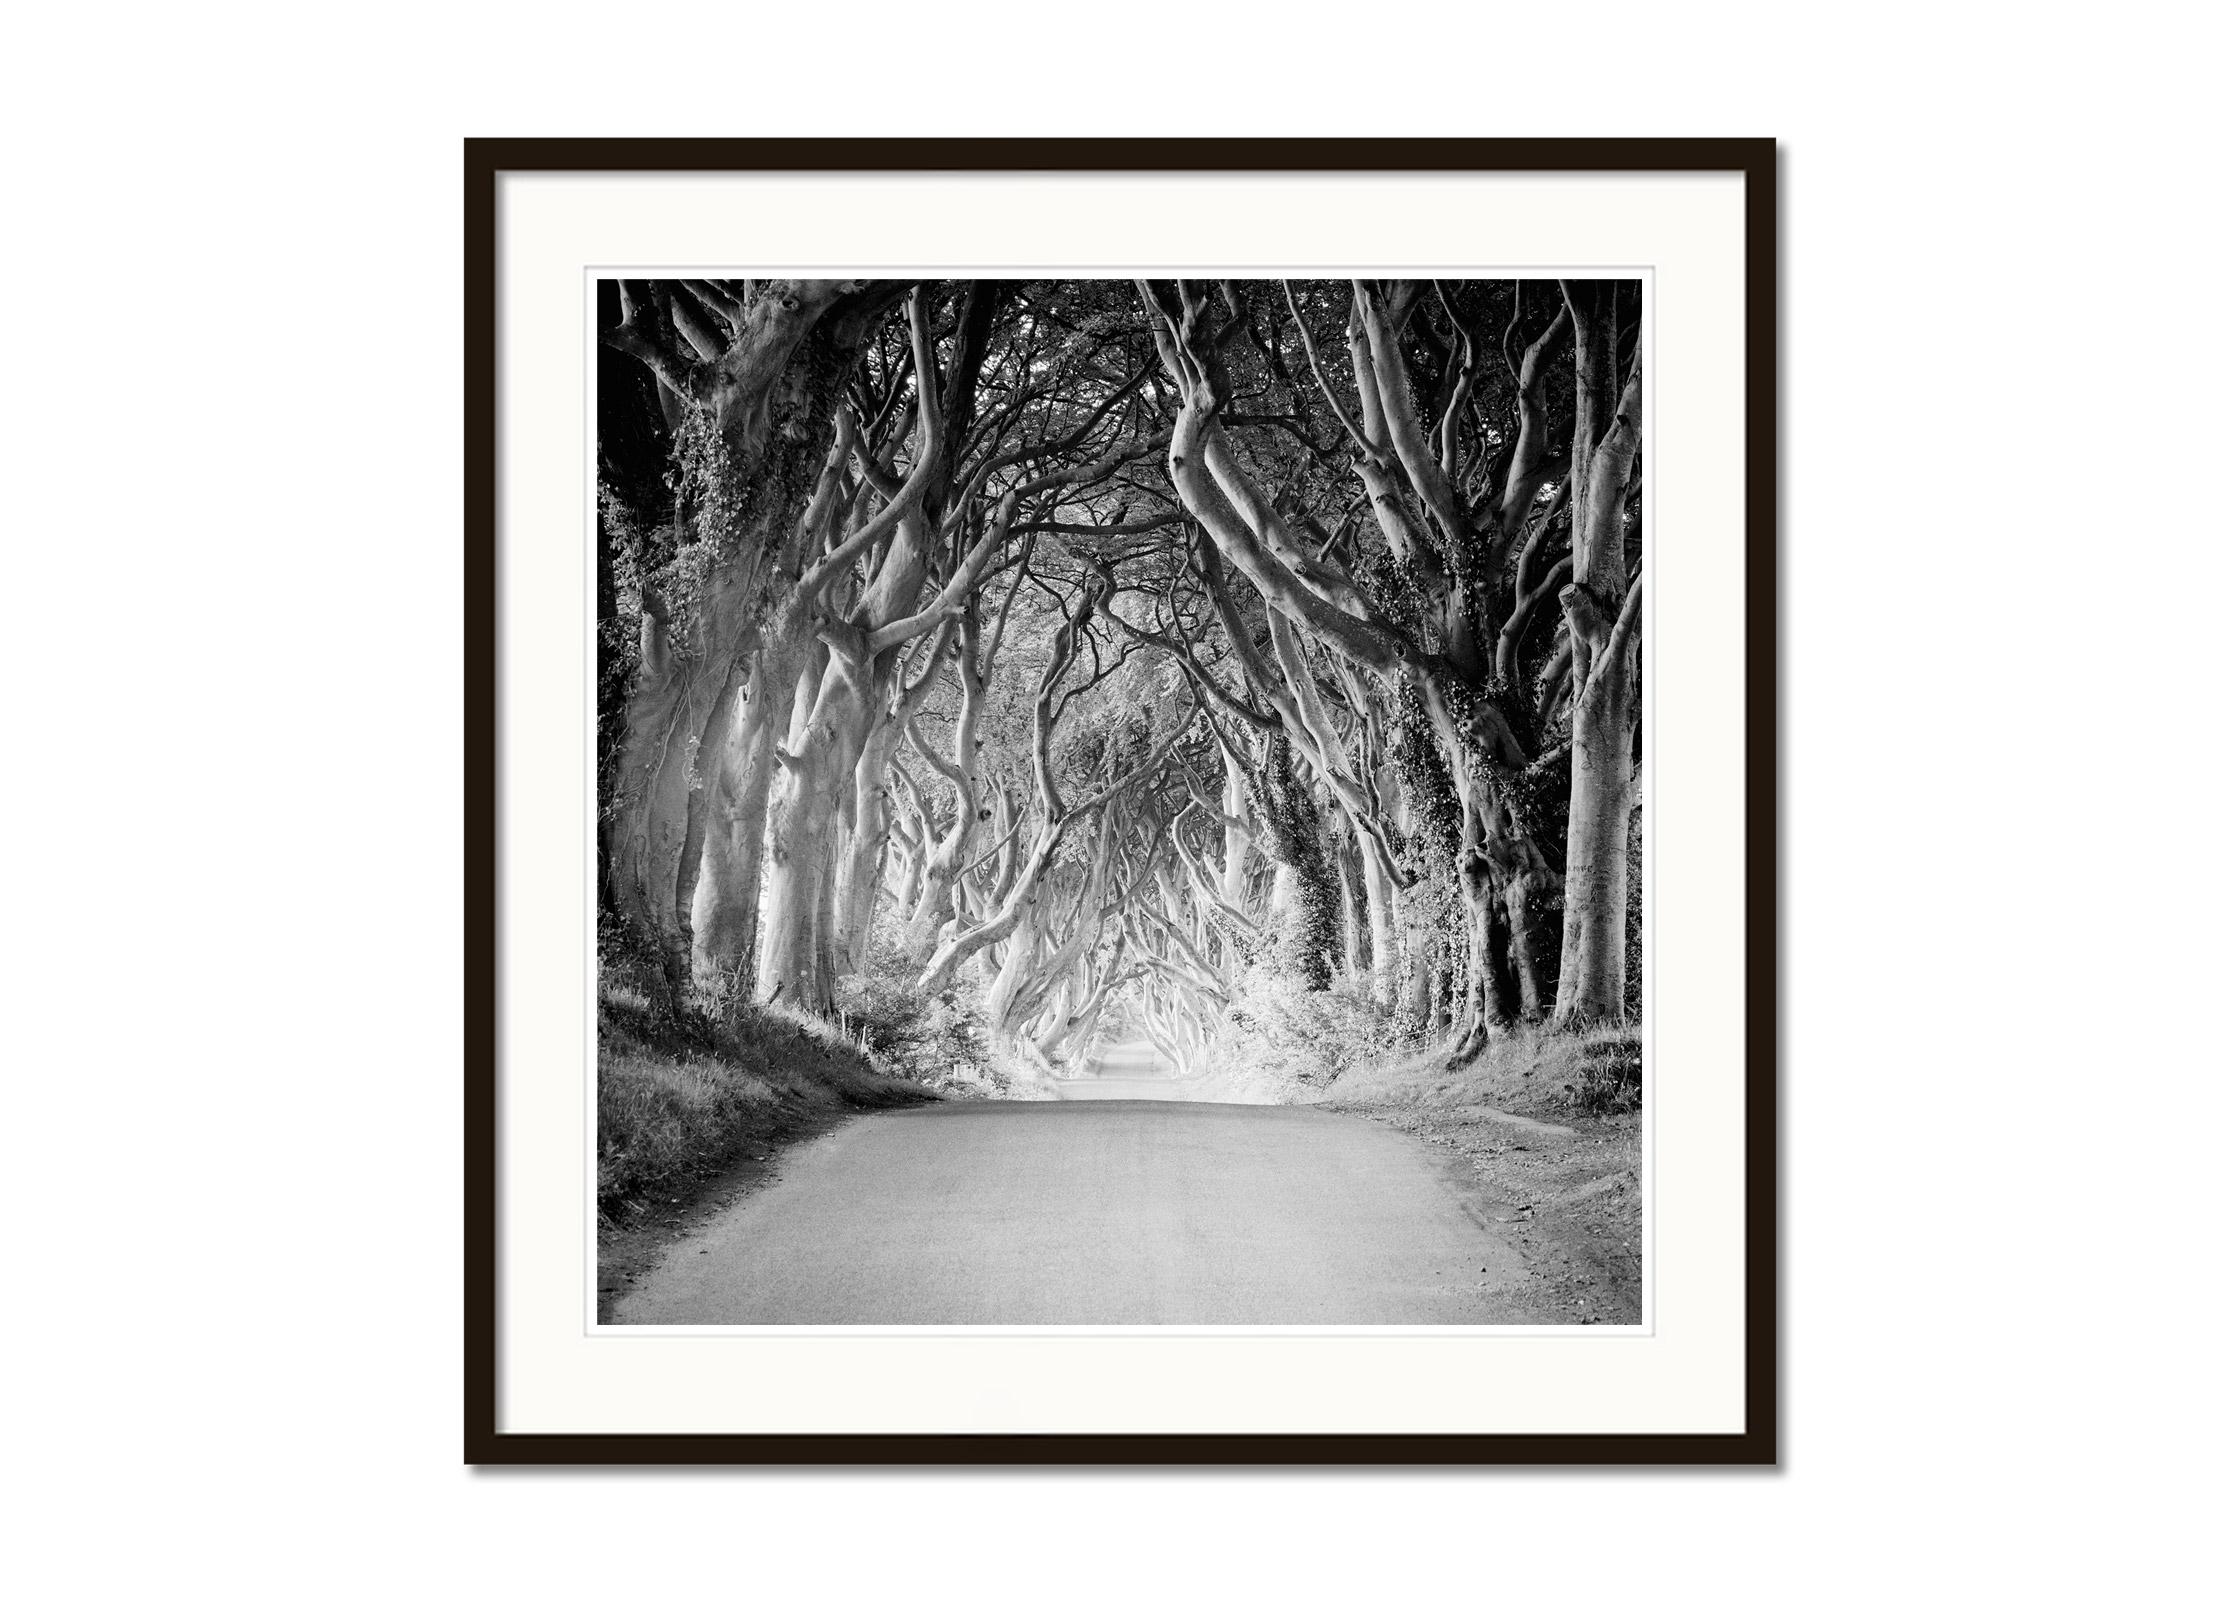 Gerald Berghammer - Limited edition of 7.
Archival fine art pigment print. Signed, titled, dated and numbered by artist. Certificate of authenticity included. Printed with 4cm white border.
15.75 x 15.75 in. (40 x 40 cm) edition of 9
23.63 x 23.63